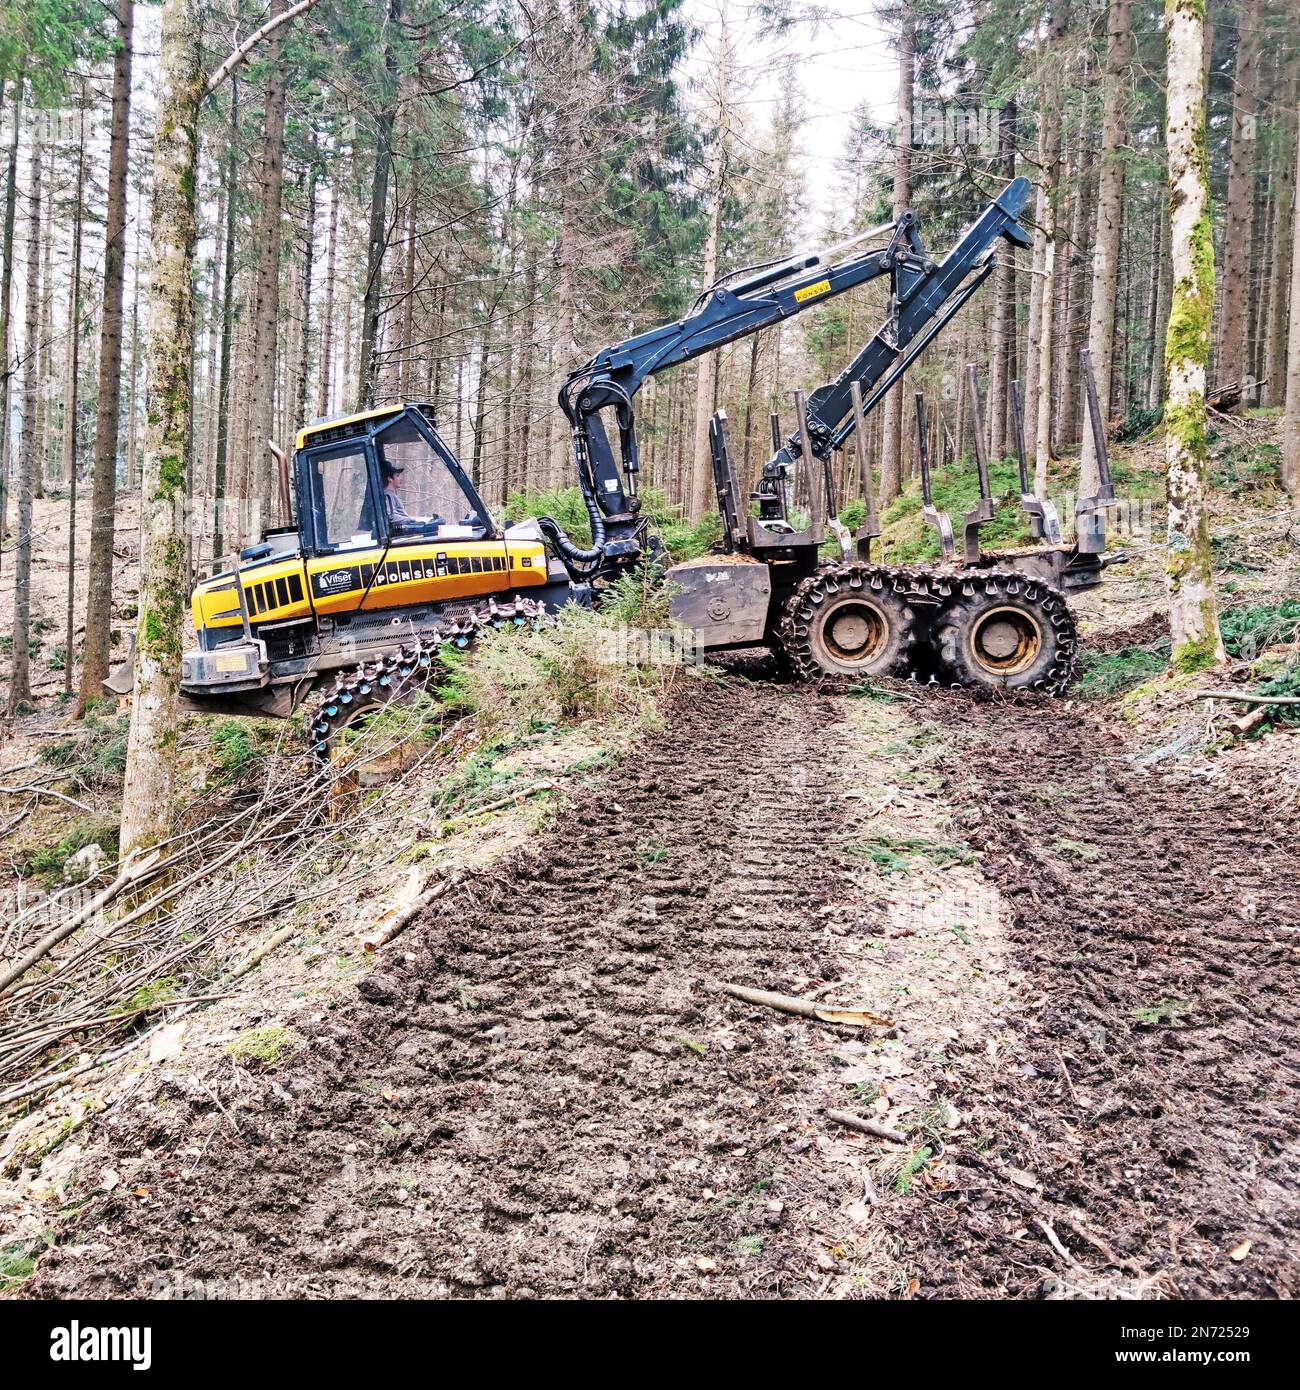 Forest work with a harvester machine for timber harvesting Stock Photo